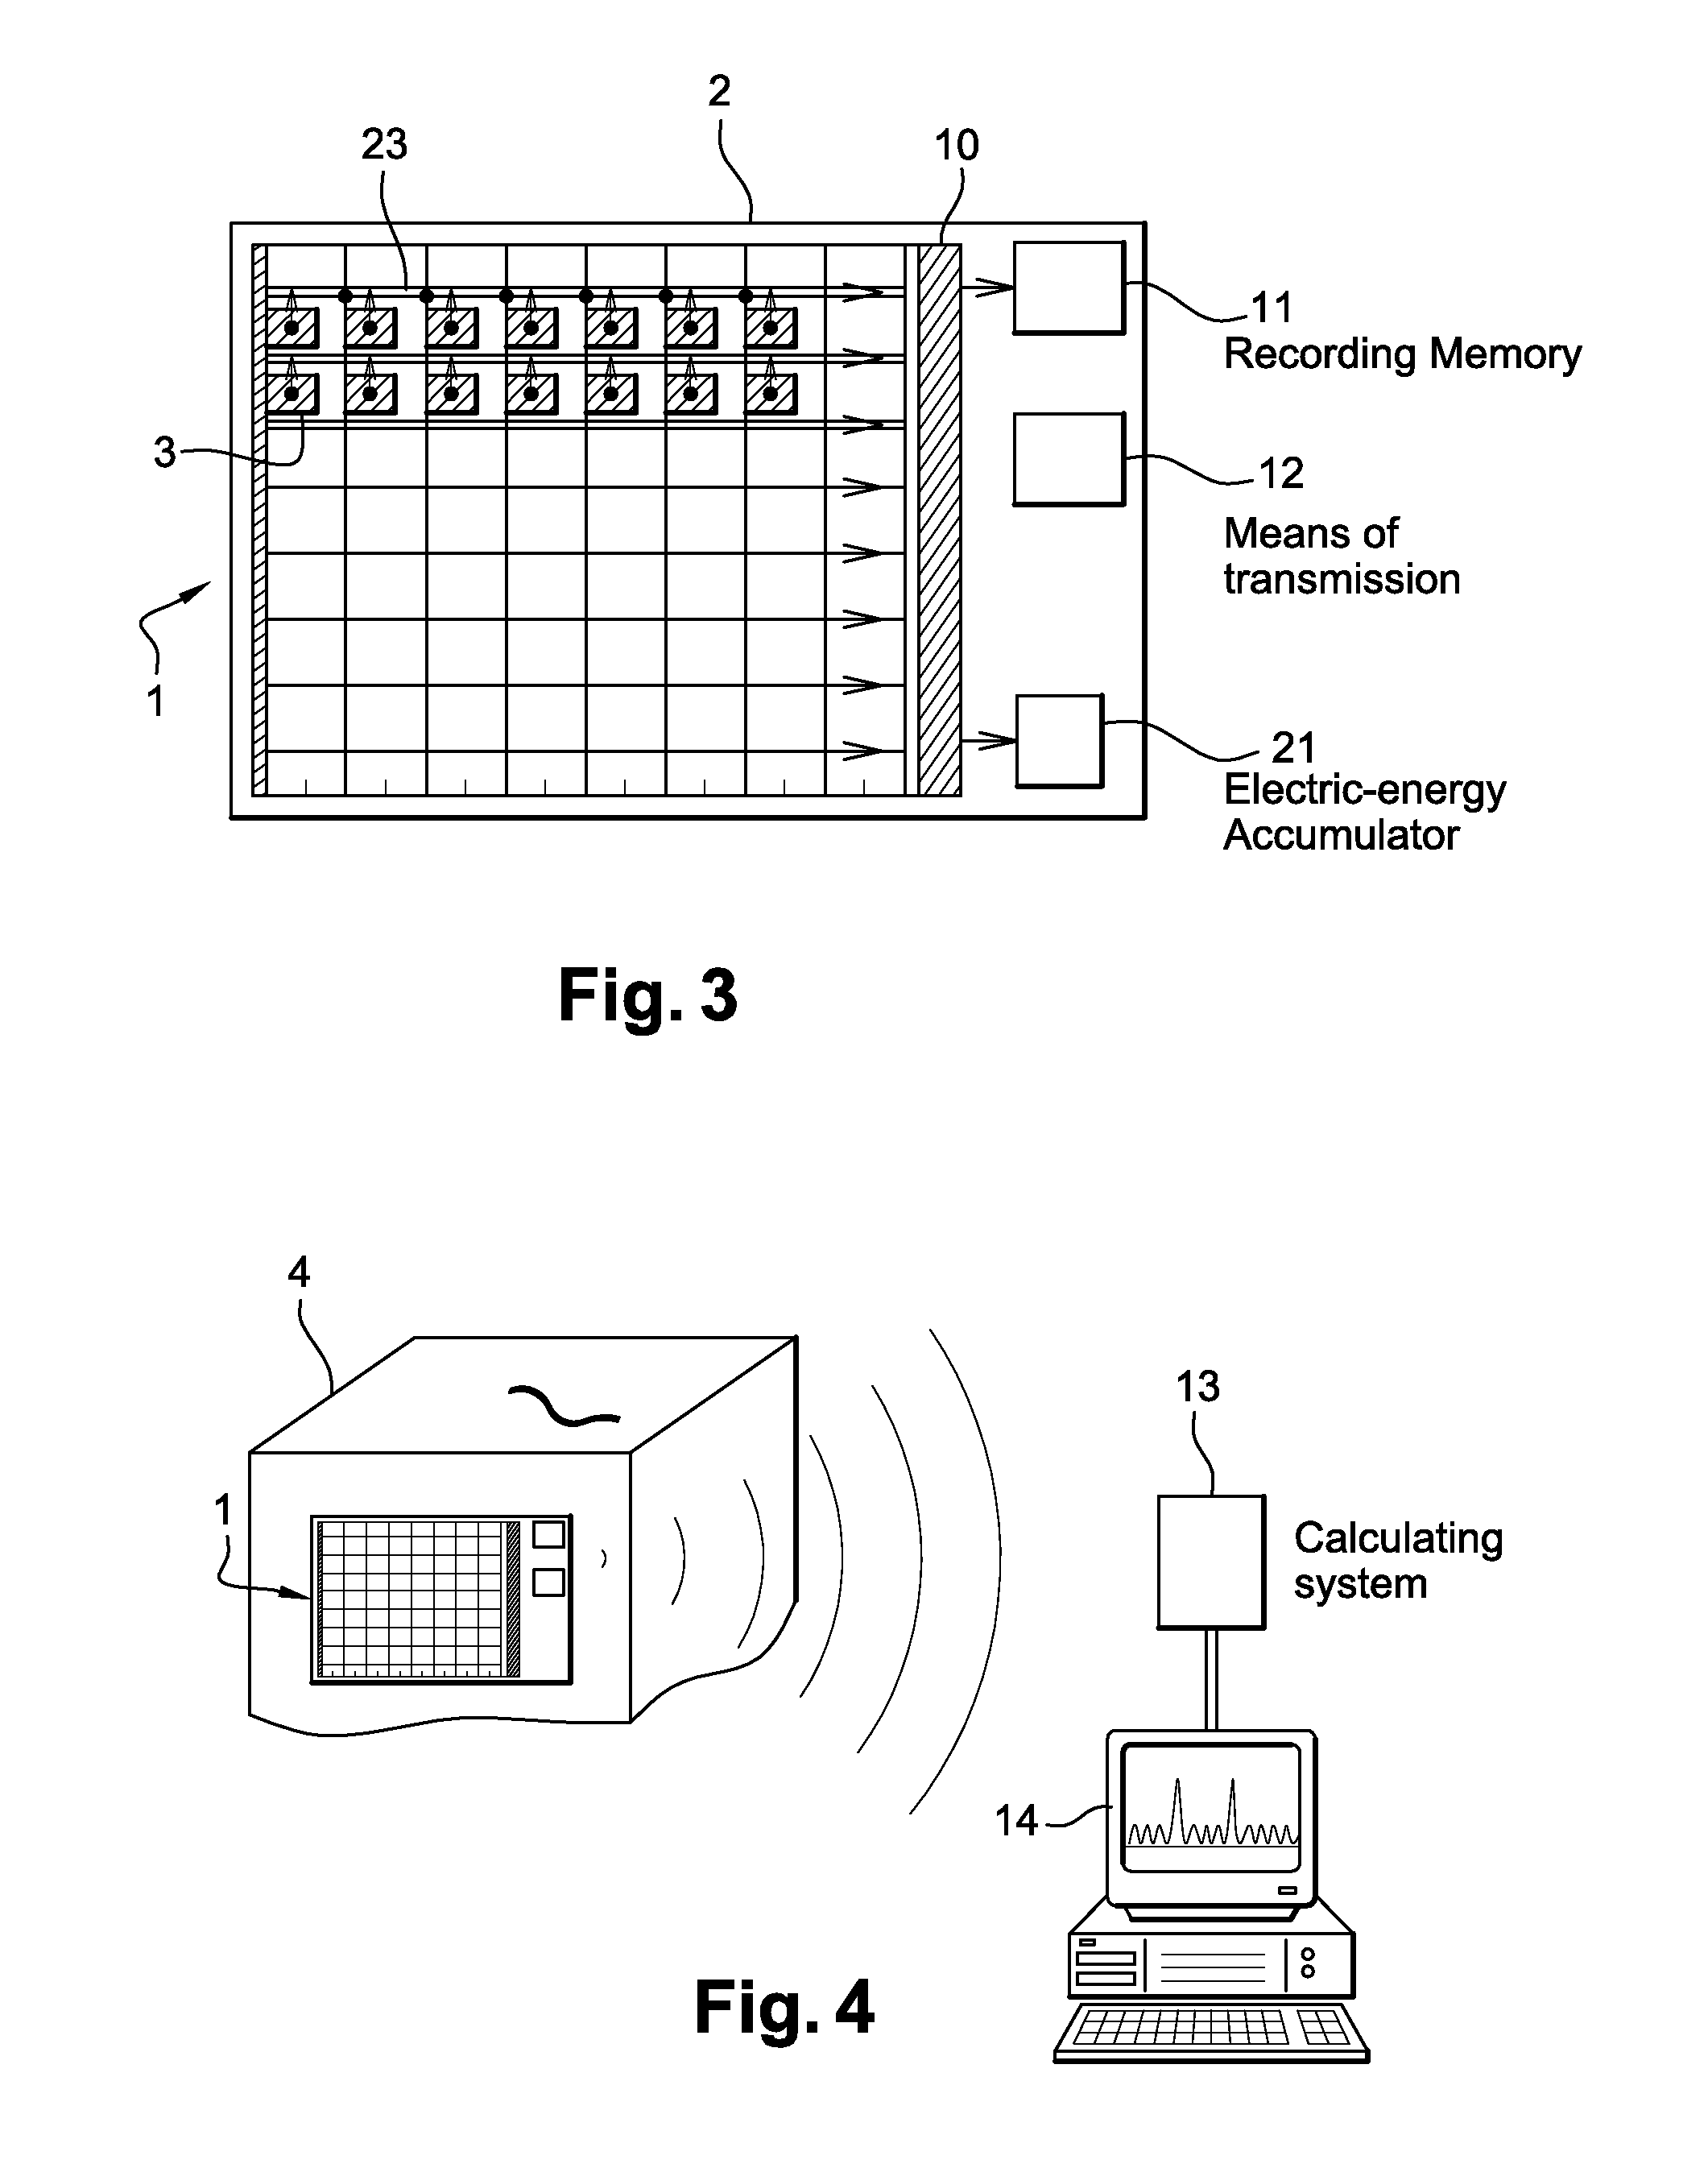 Device for non-destructive testing of a structure by vibratory analysis